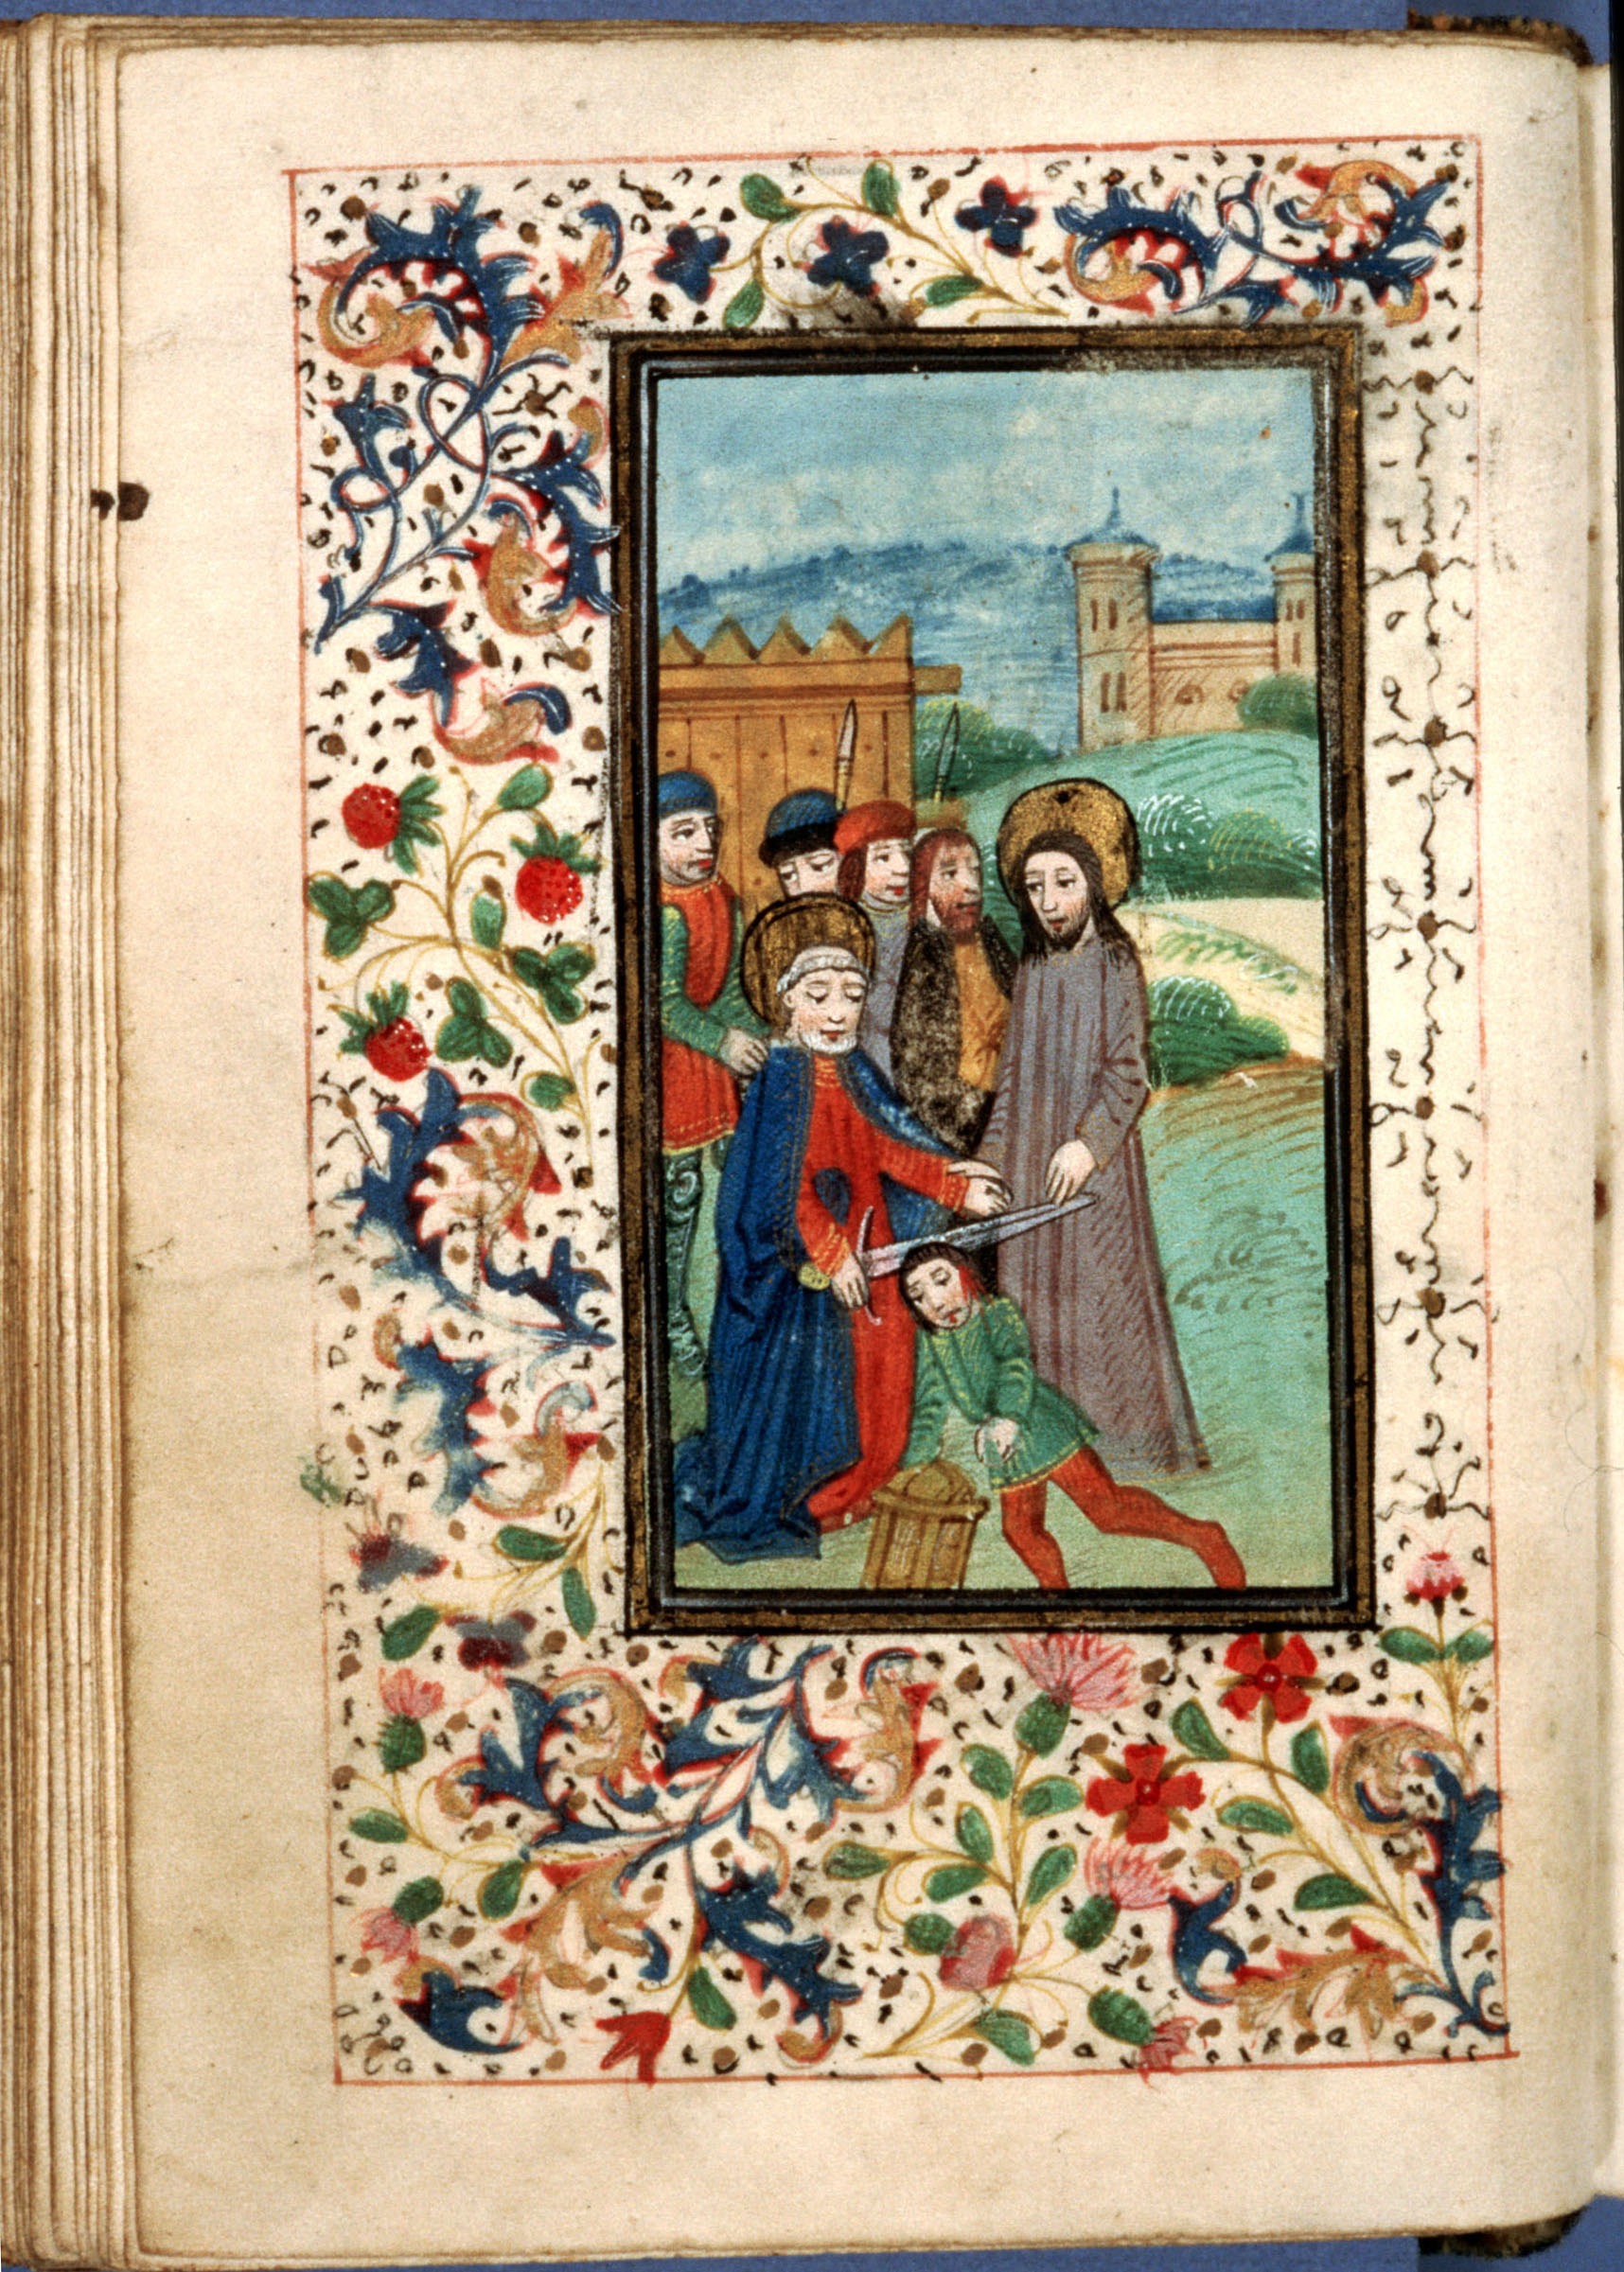 15th-c. Latin Book of Hours from the Grey Collection, National Library of South Africa (<a href='https://w3id.org/vhmml/readingRoom/view/80897'>South Africa 1</a>)